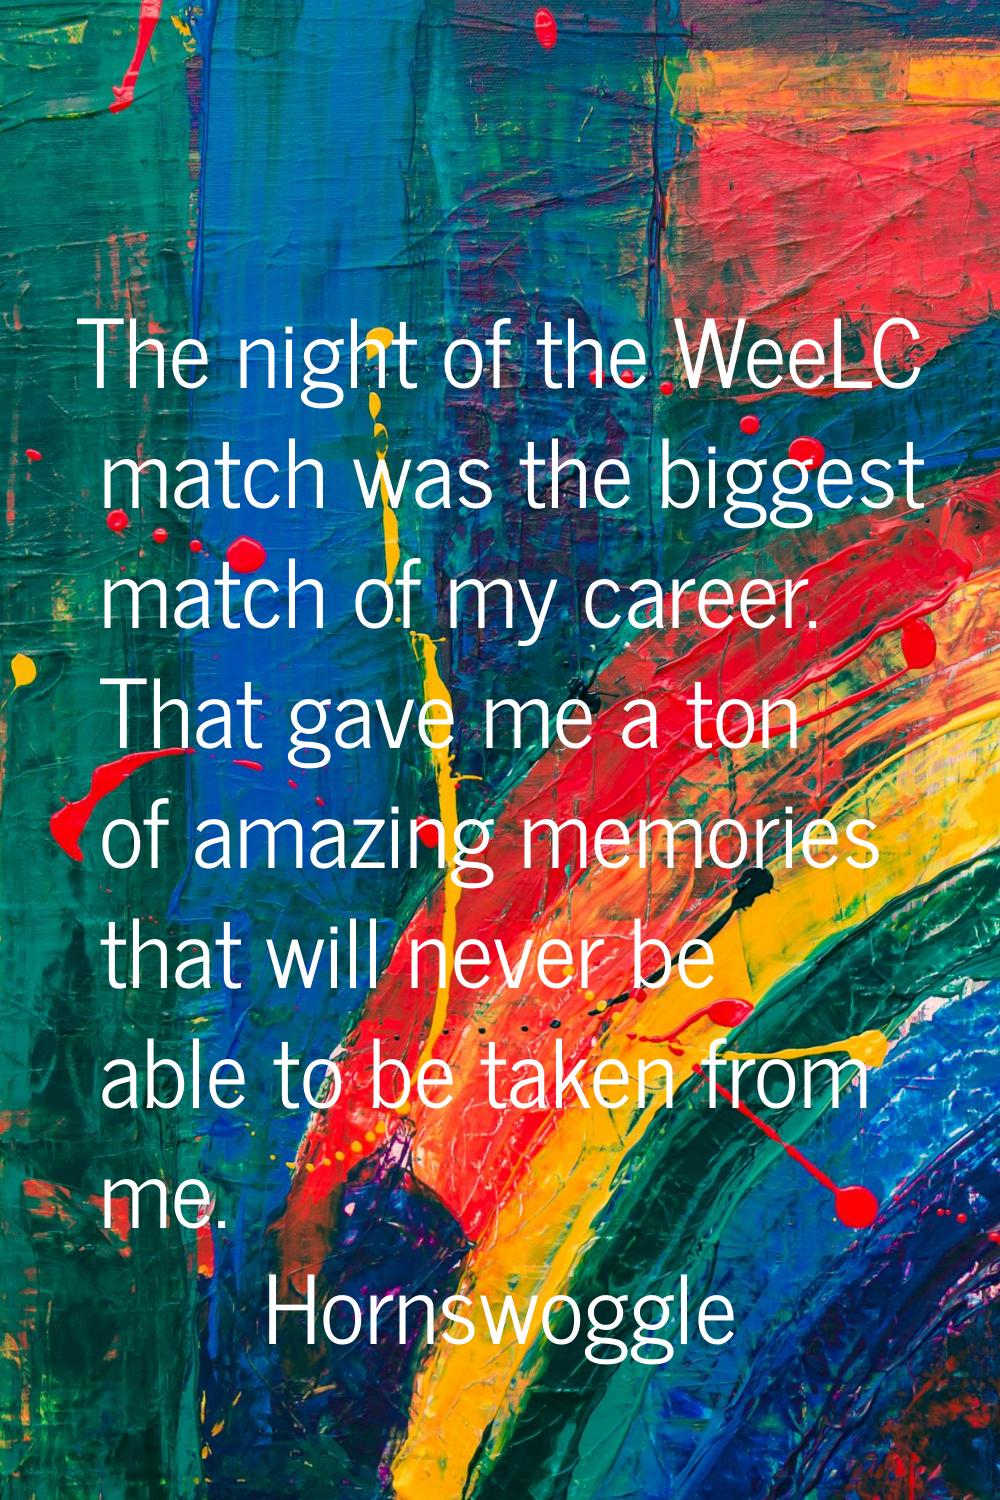 The night of the WeeLC match was the biggest match of my career. That gave me a ton of amazing memo